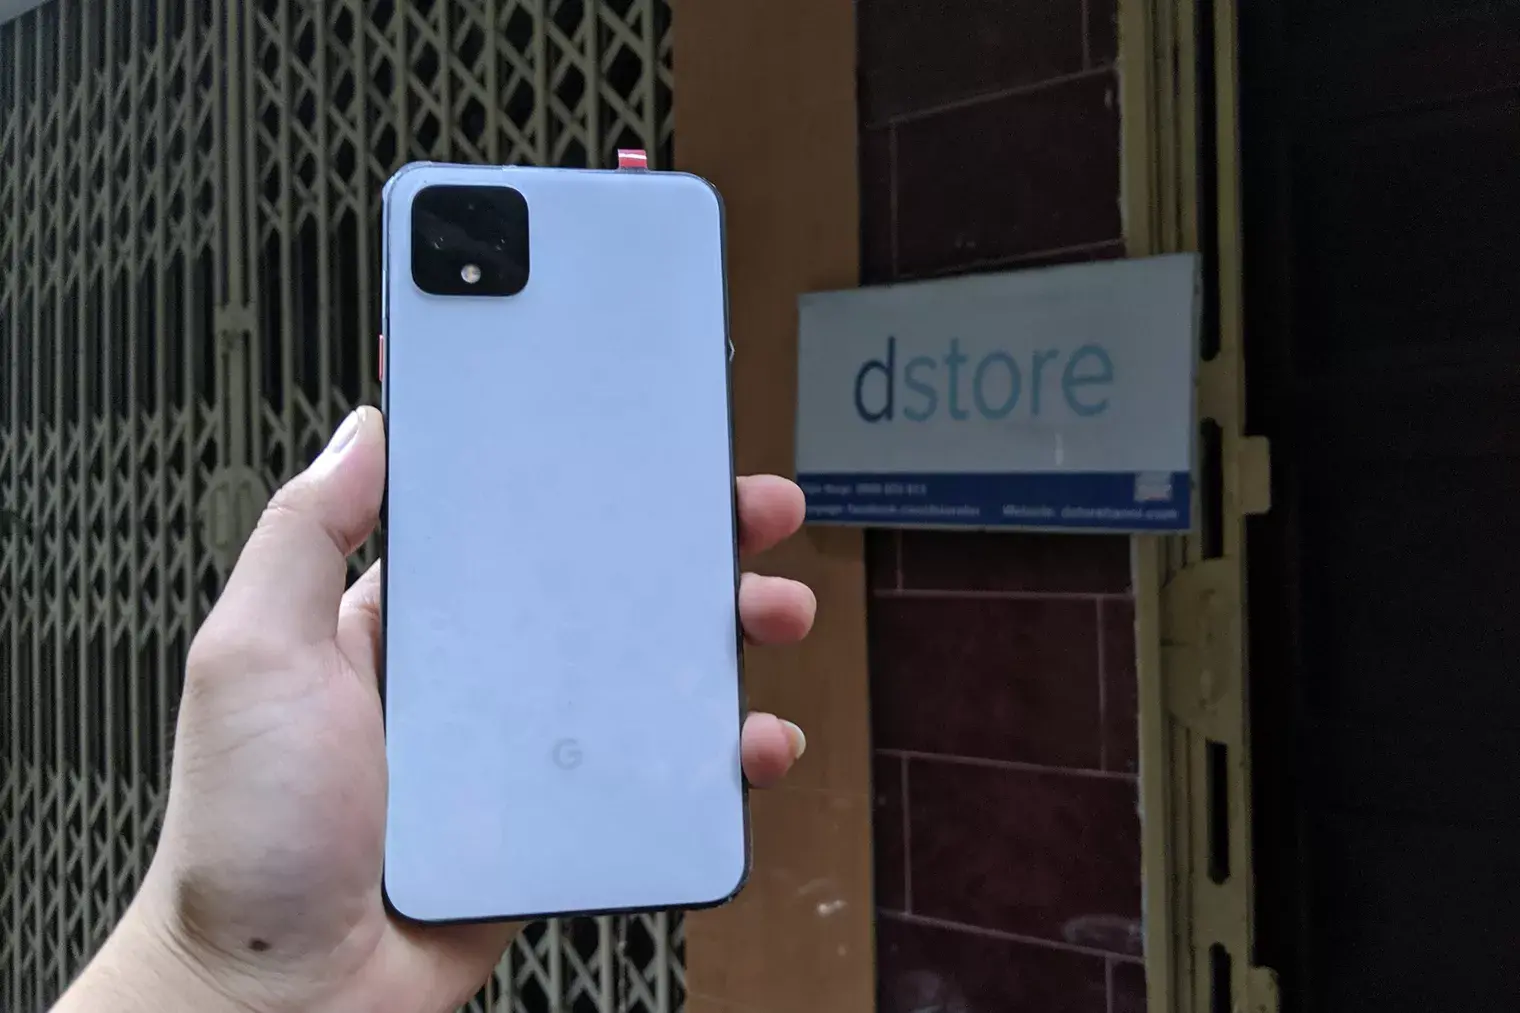 A Google Pixel 4 XL test unit dressed in White - Check out today's batch of Google Pixel 4 XL images